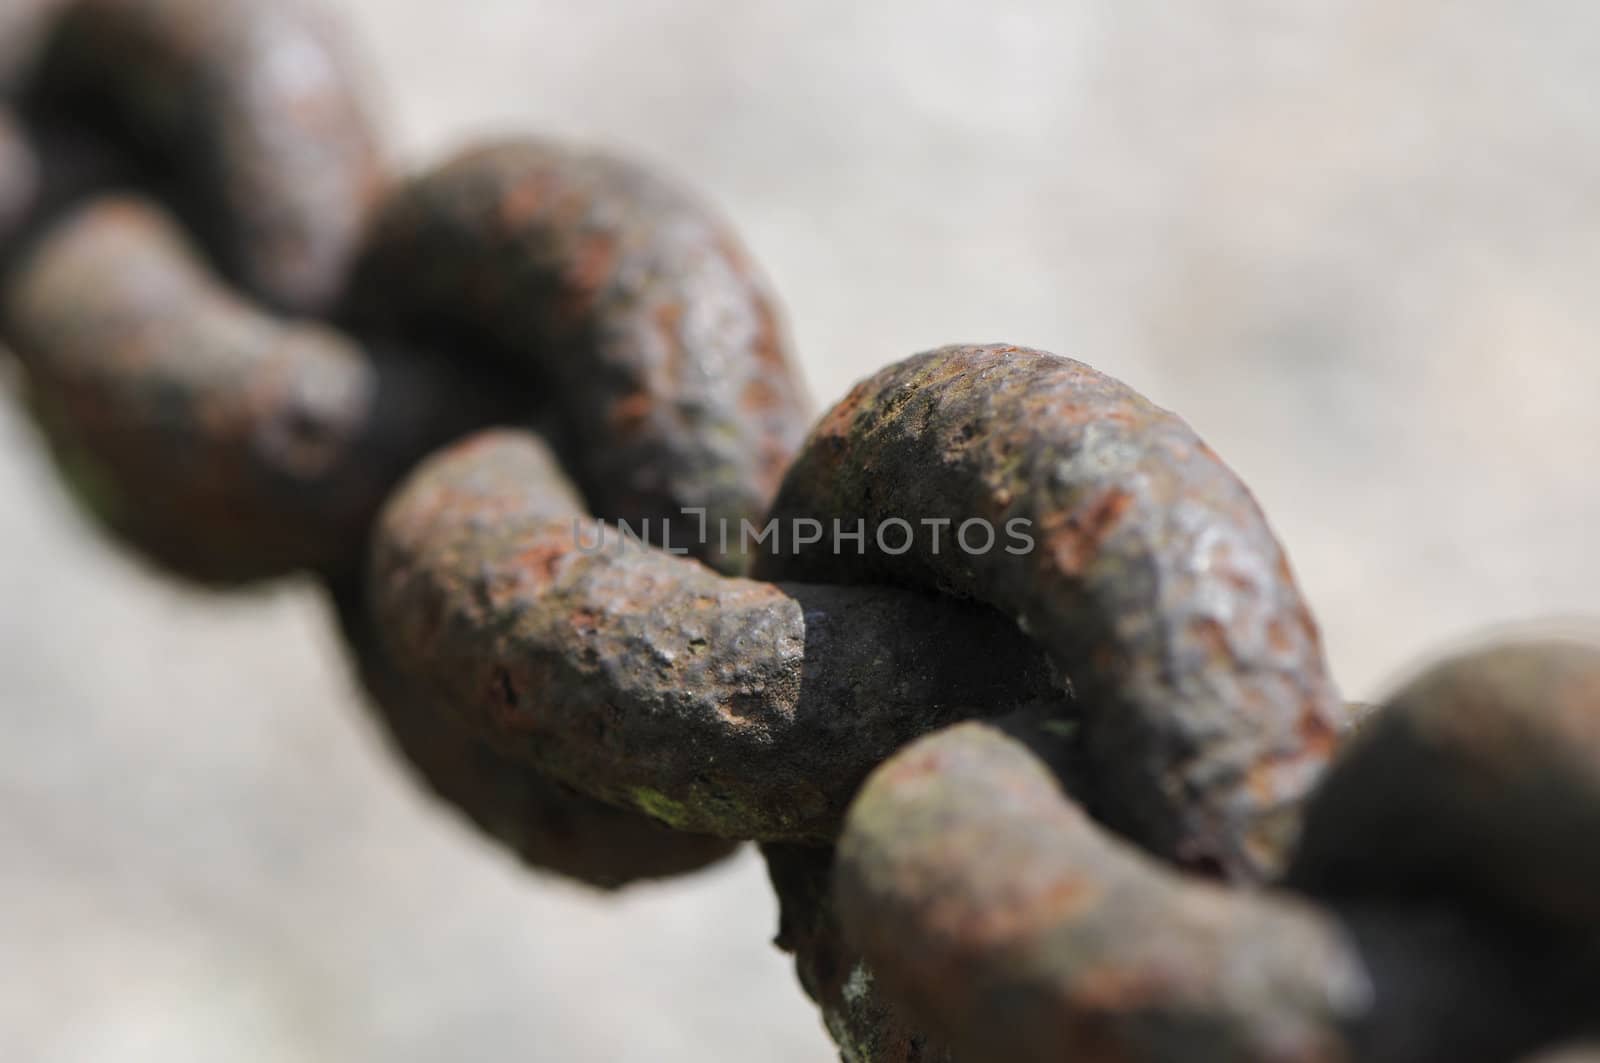 Extreme close-up of a rusted chain with big links by shkyo30